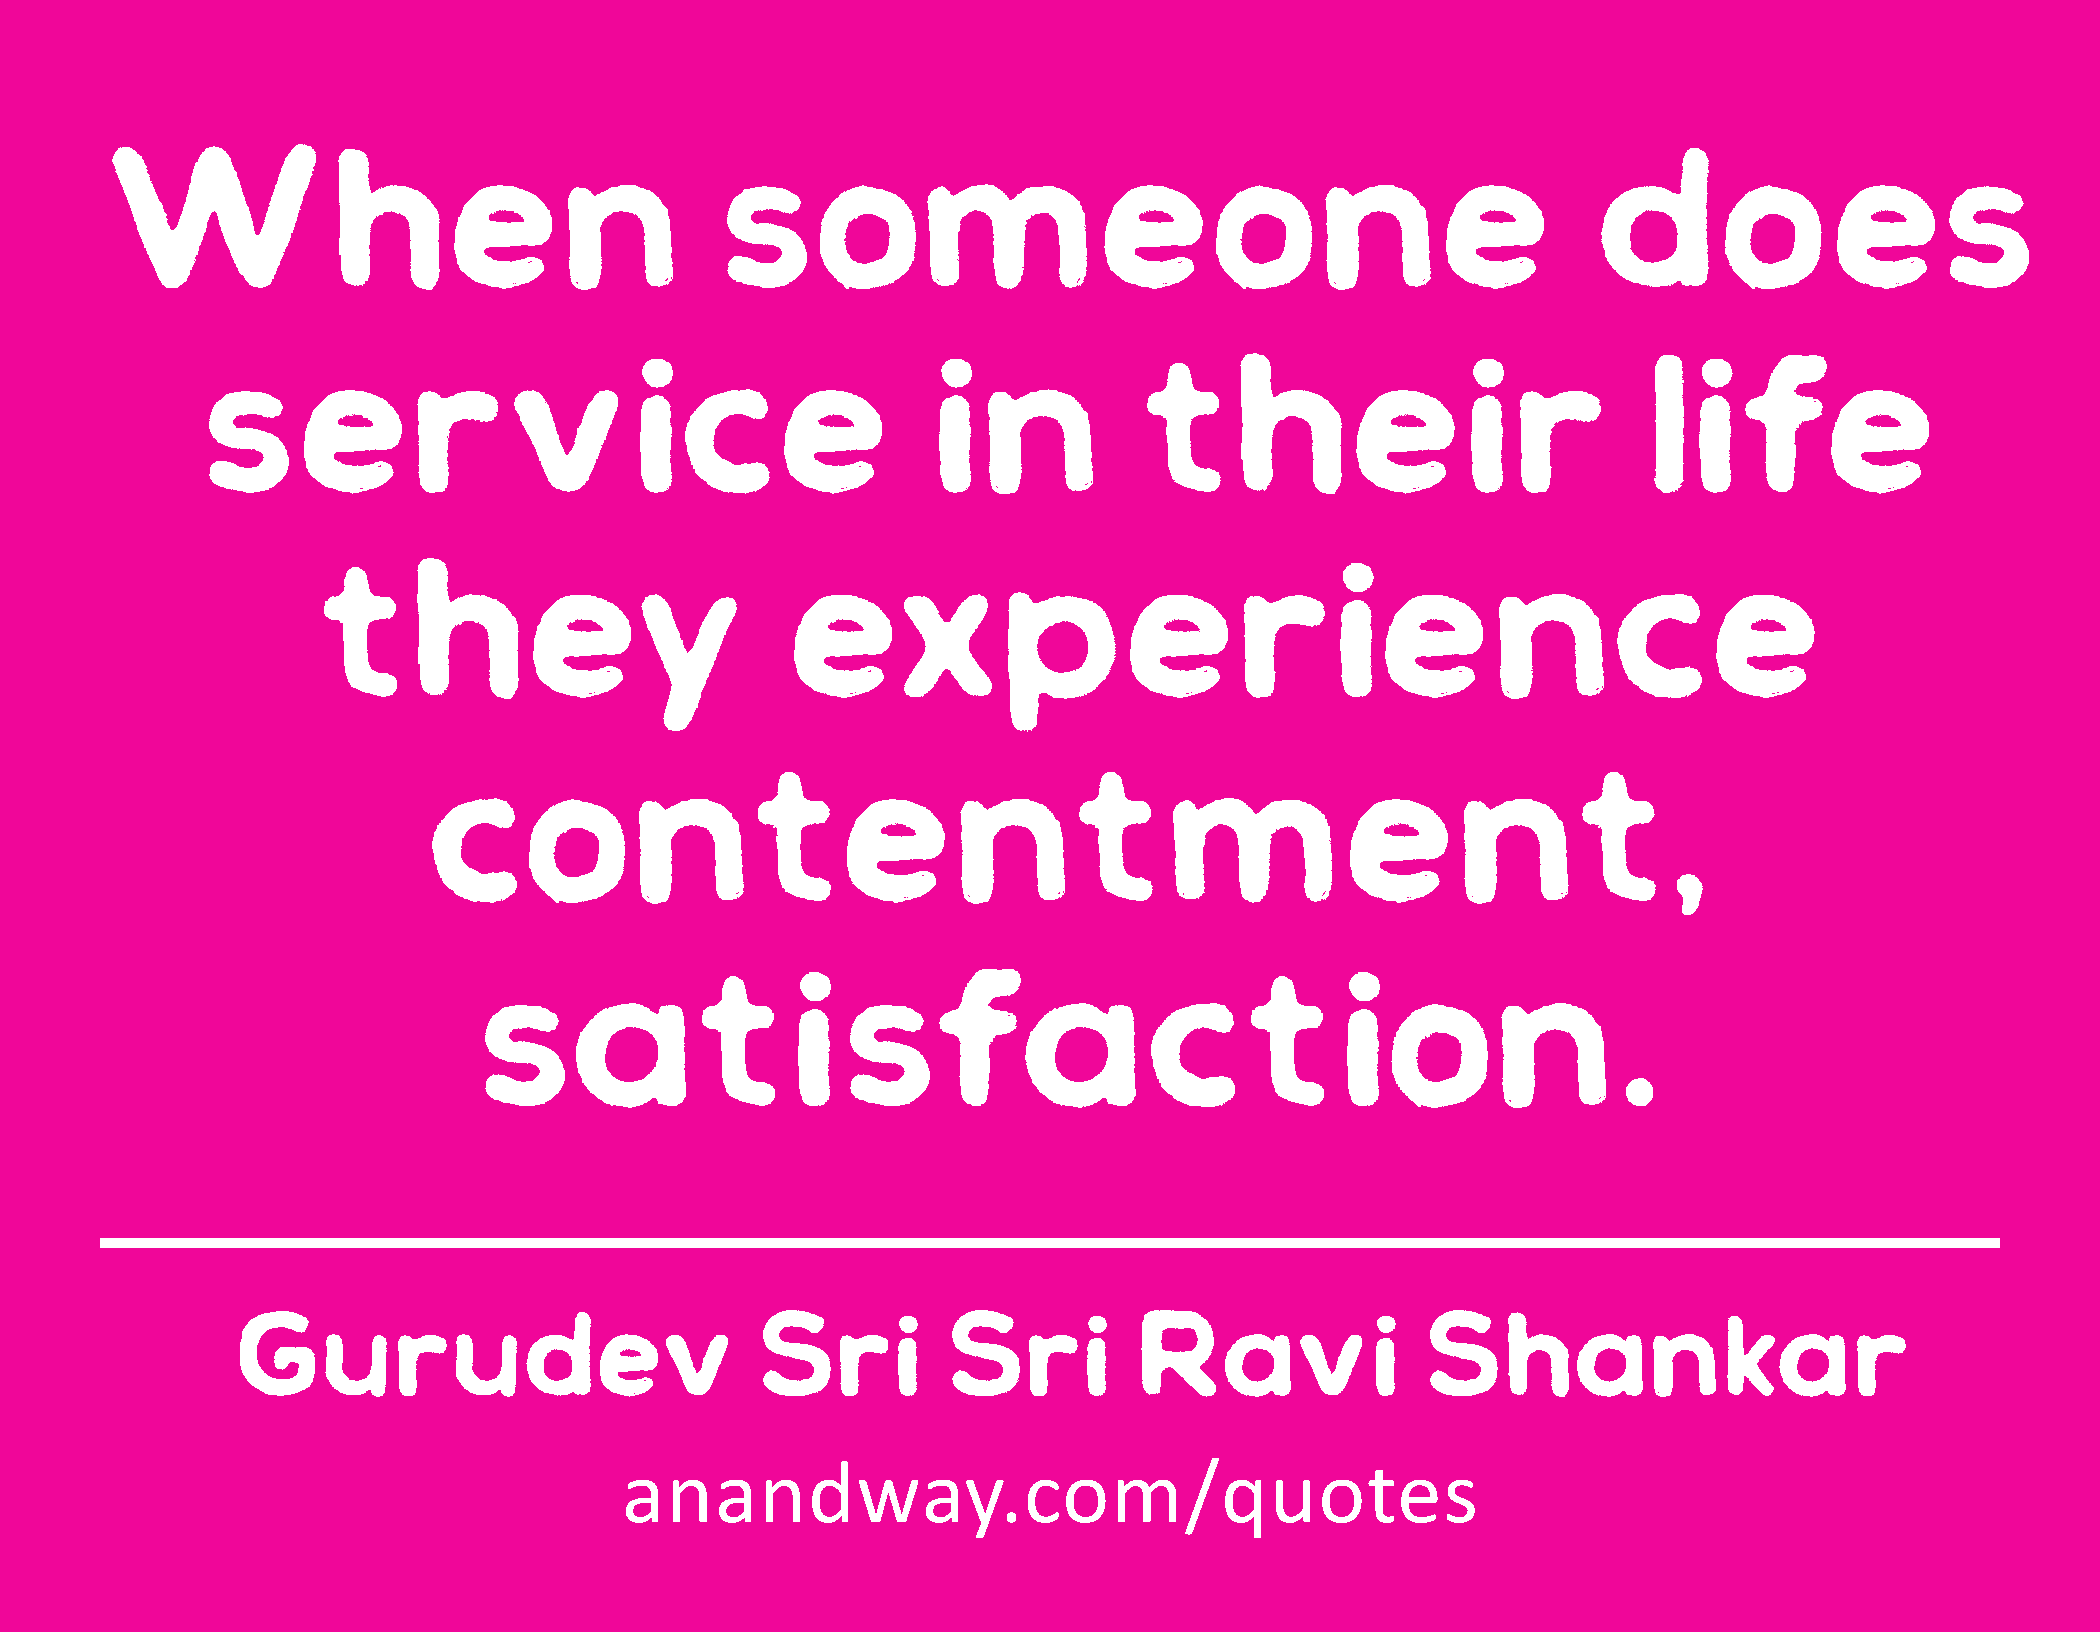 When someone does service in their life they experience contentment, satisfaction. 
 -Gurudev Sri Sri Ravi Shankar